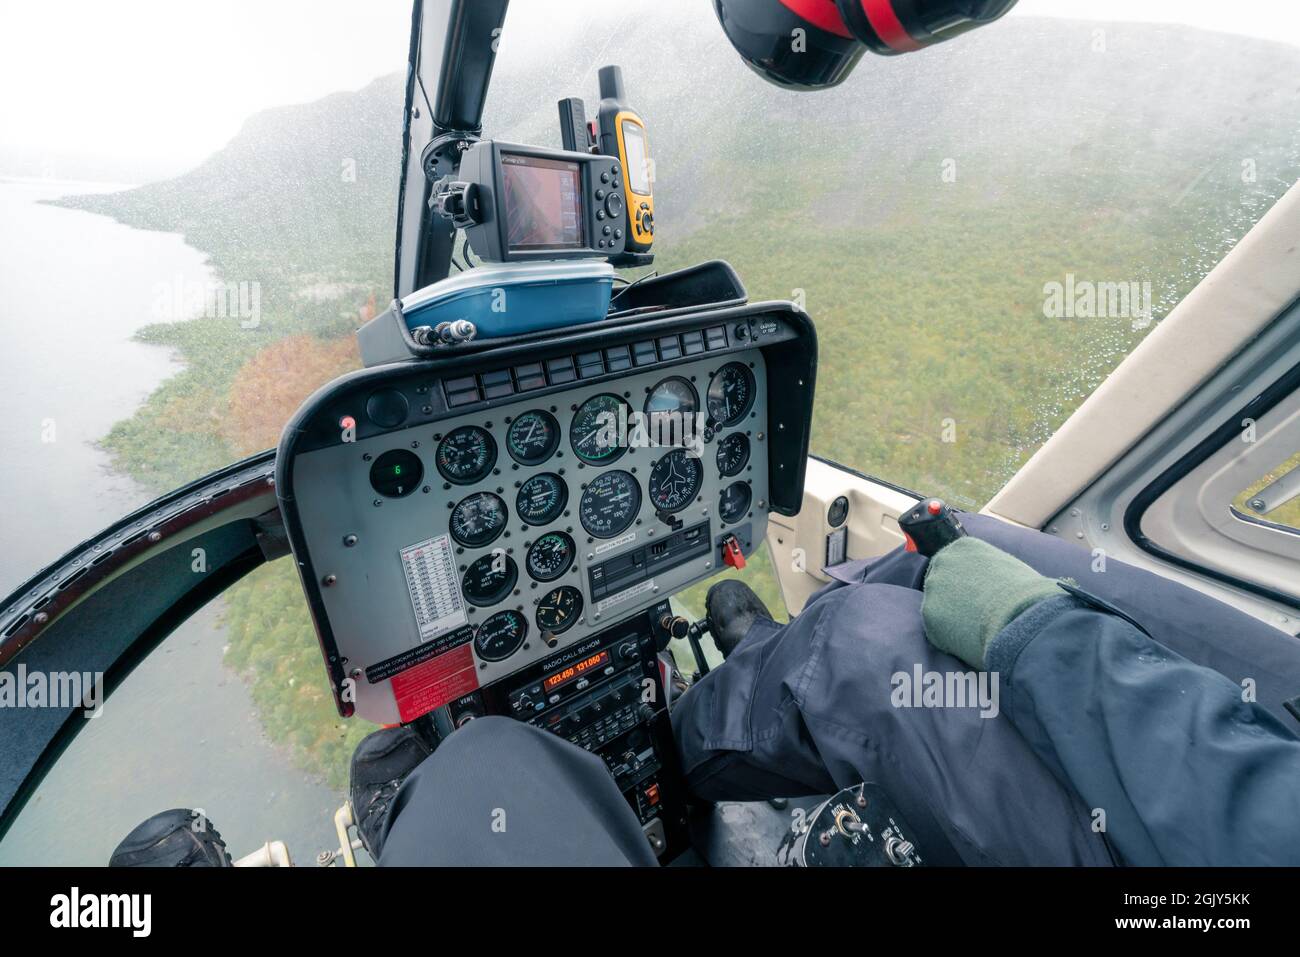 Vietas, Sweden - 08.16.2021: Control panel in a cockpit of small helicopter with glass front and bottom flying over harsh arctic landscape on a very Stock Photo